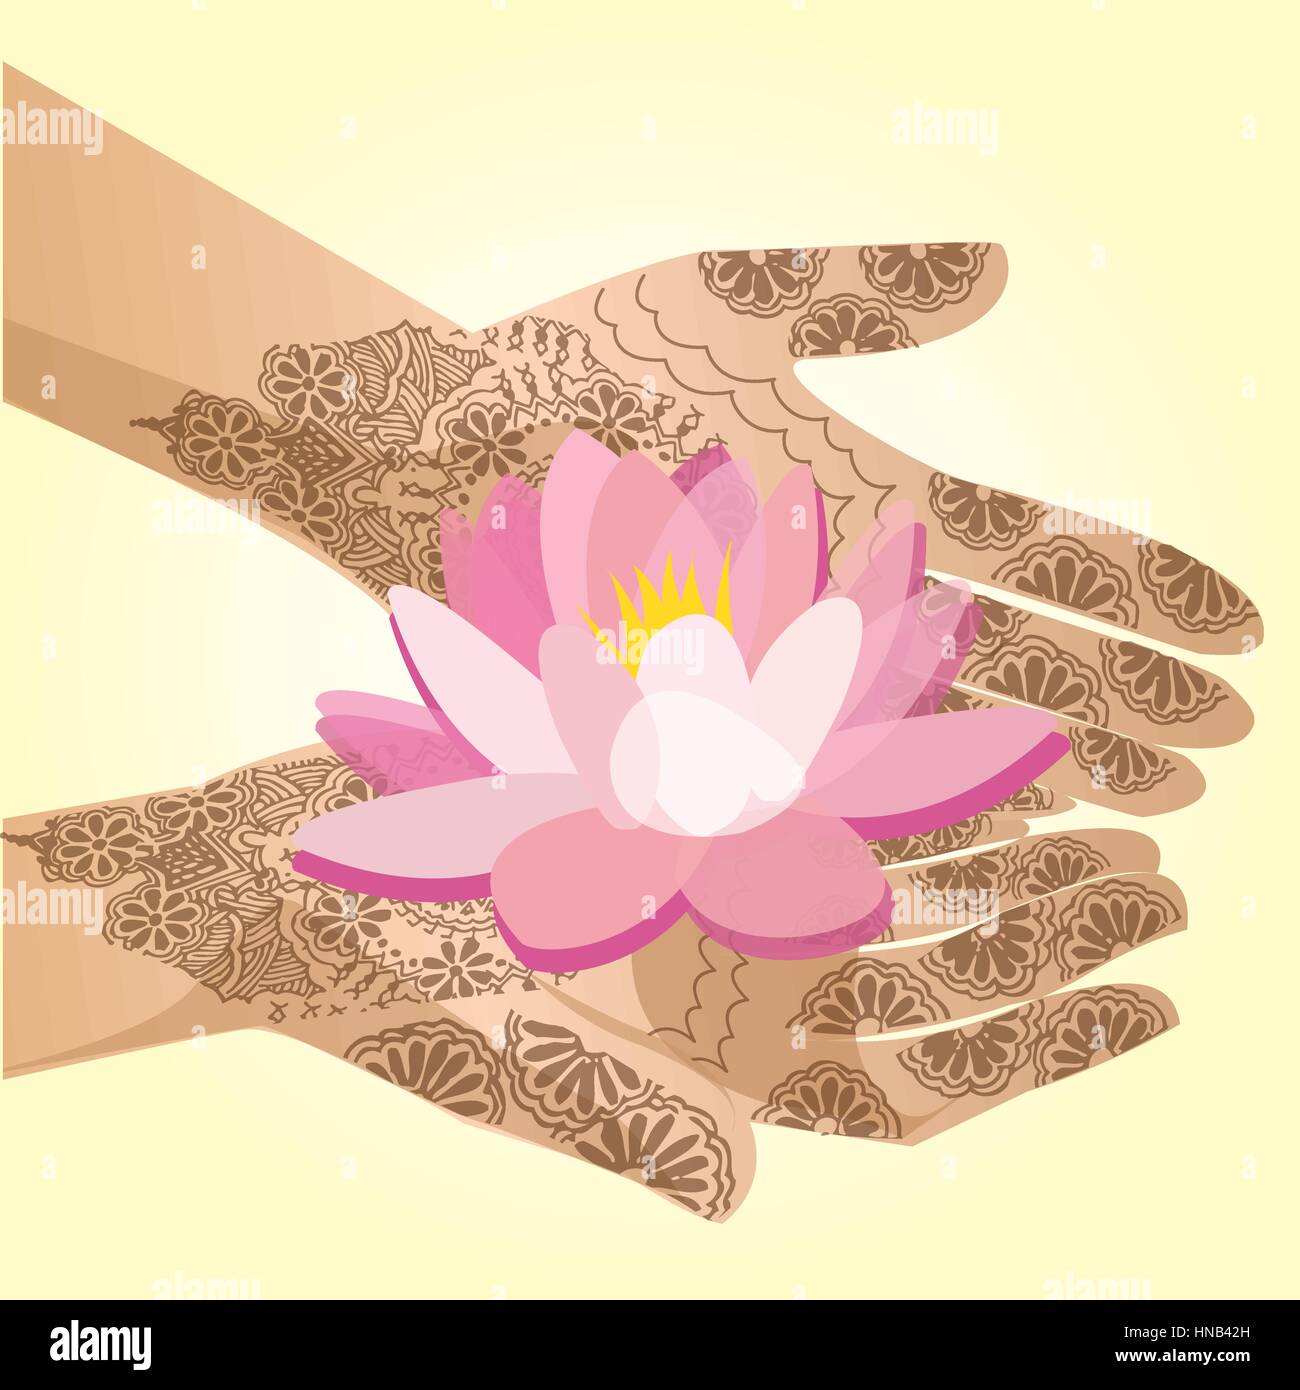 Hands decorated with henna indian woman holding a lotus flower Stock Vector